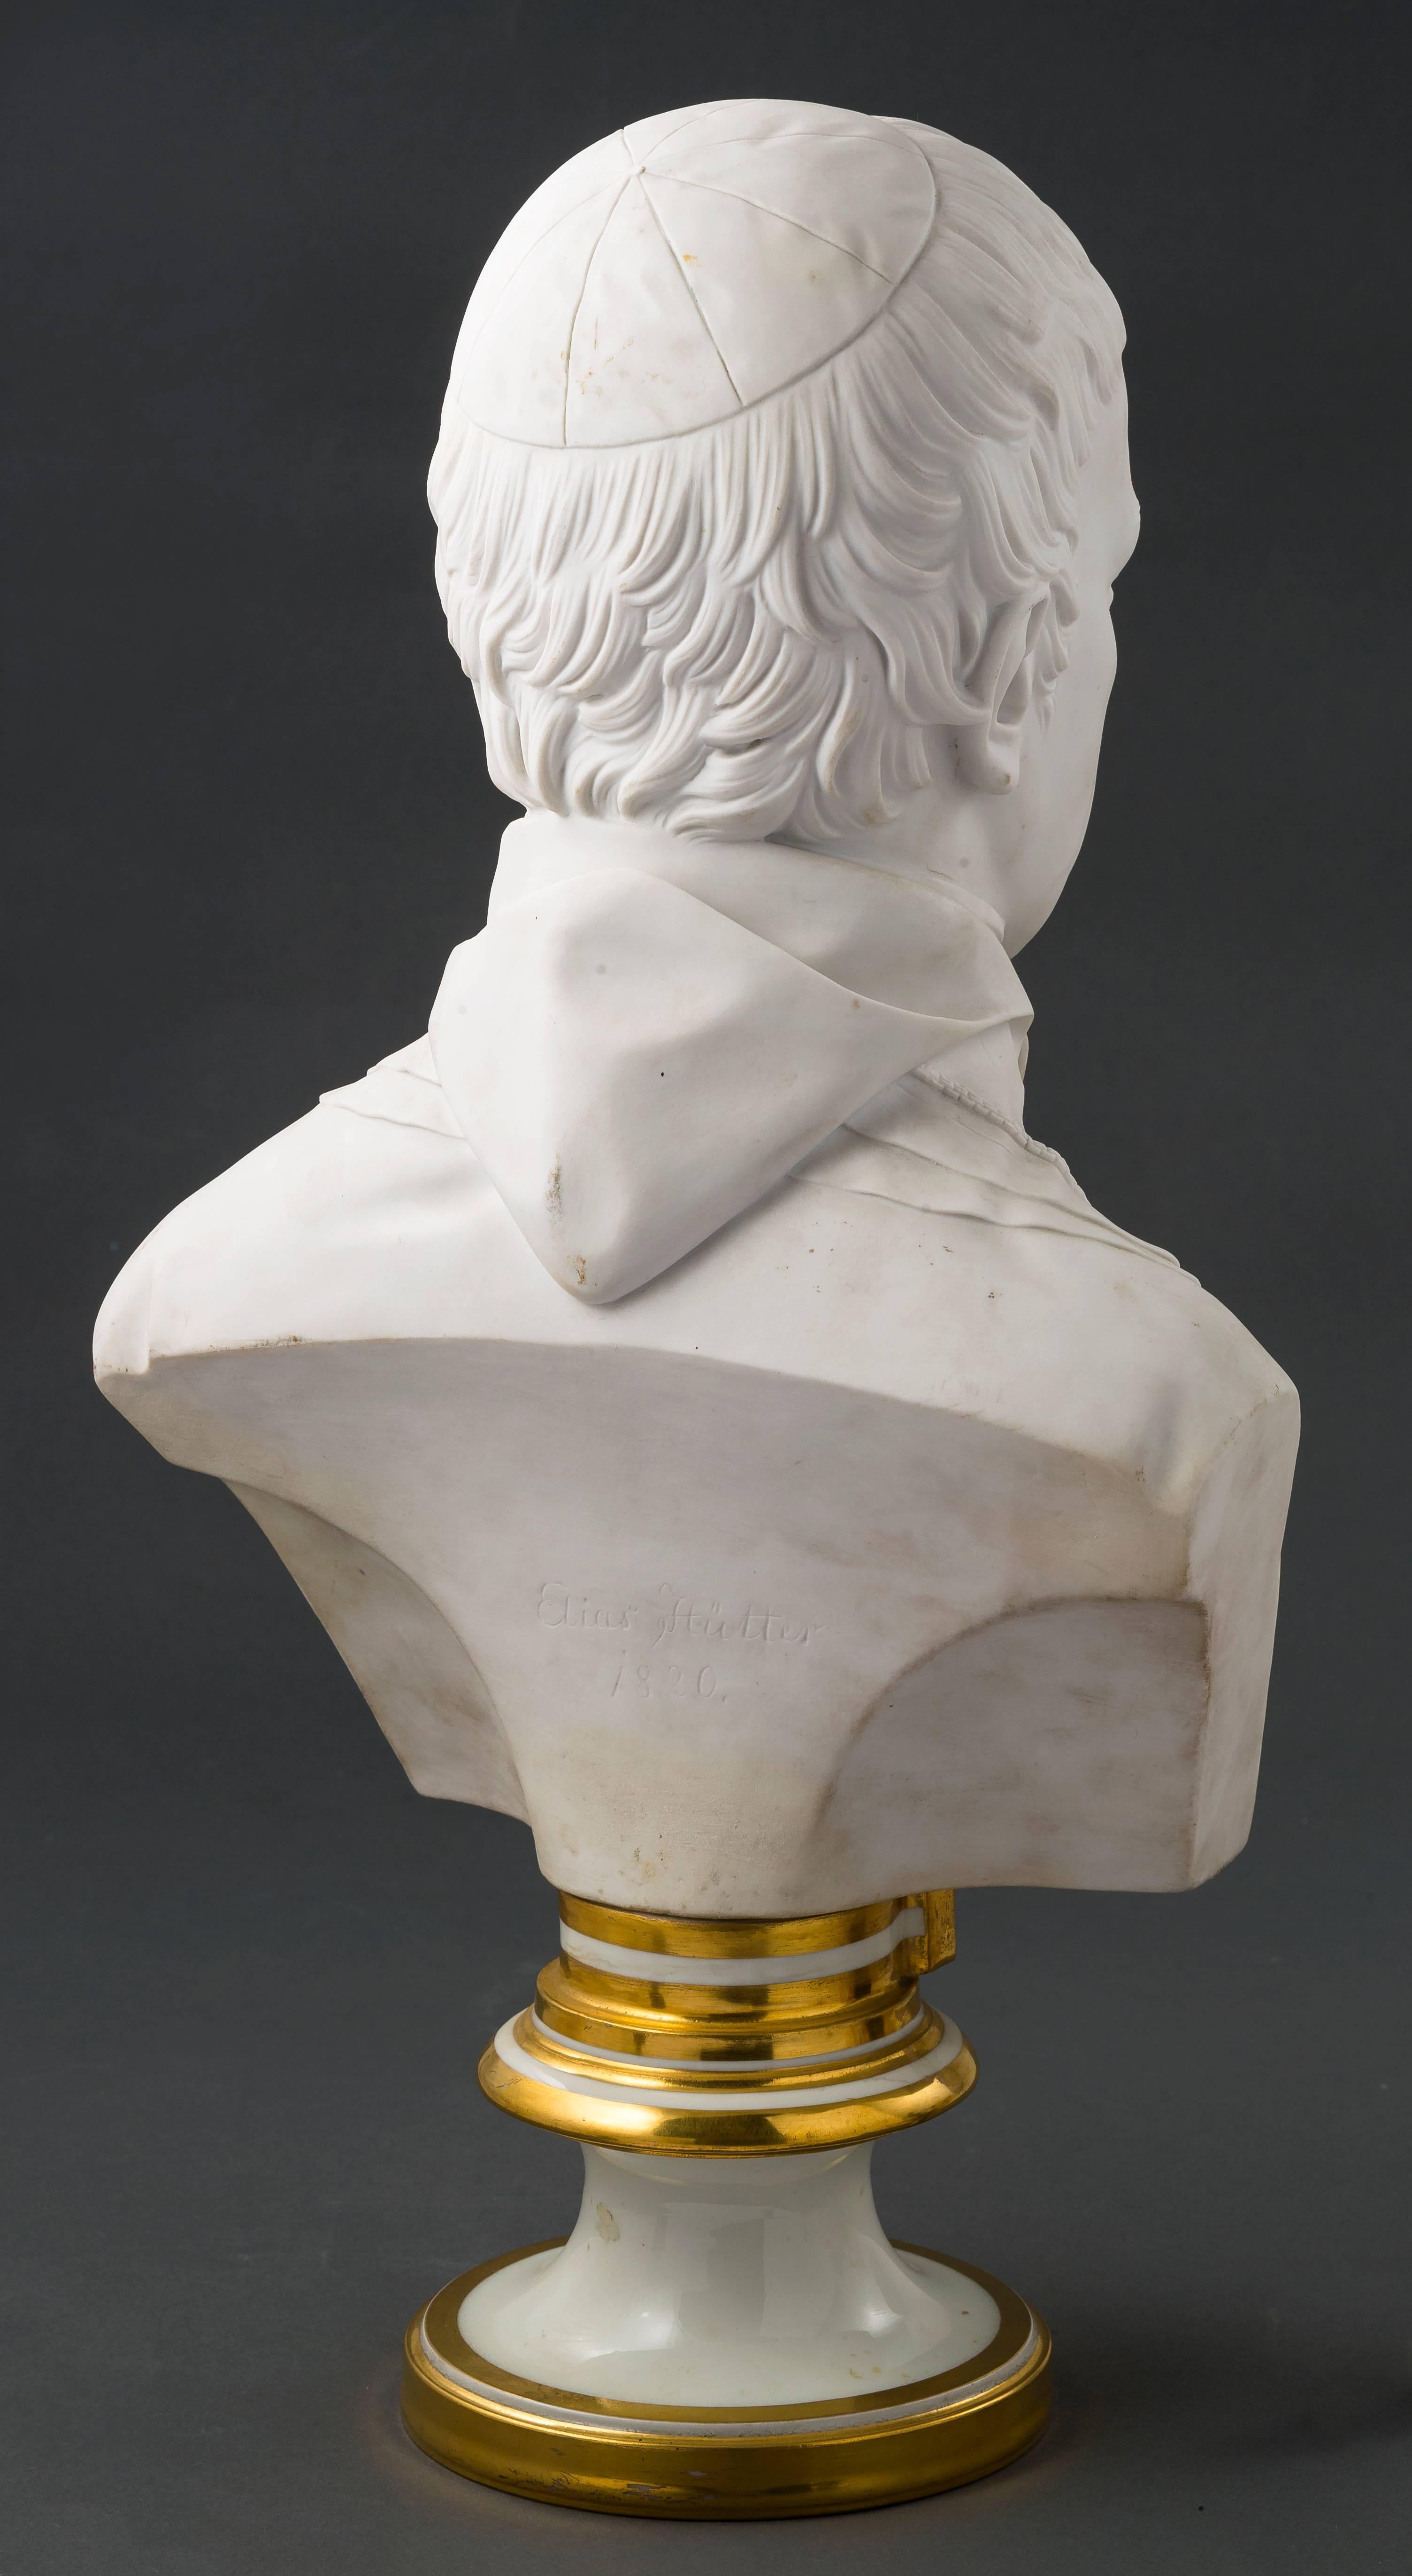 Biscuit-porcelain bust of Archduke Rudolph Johann Joseph Rainer of Austria (1788 Florence – 1819 Baden/Vienna) by Elias Hu¨tter (1774-1865).
Imperial Porcelain Manufactory Vienna 1820-1821.
Impressed beehive mark of the Imperial Porcelain